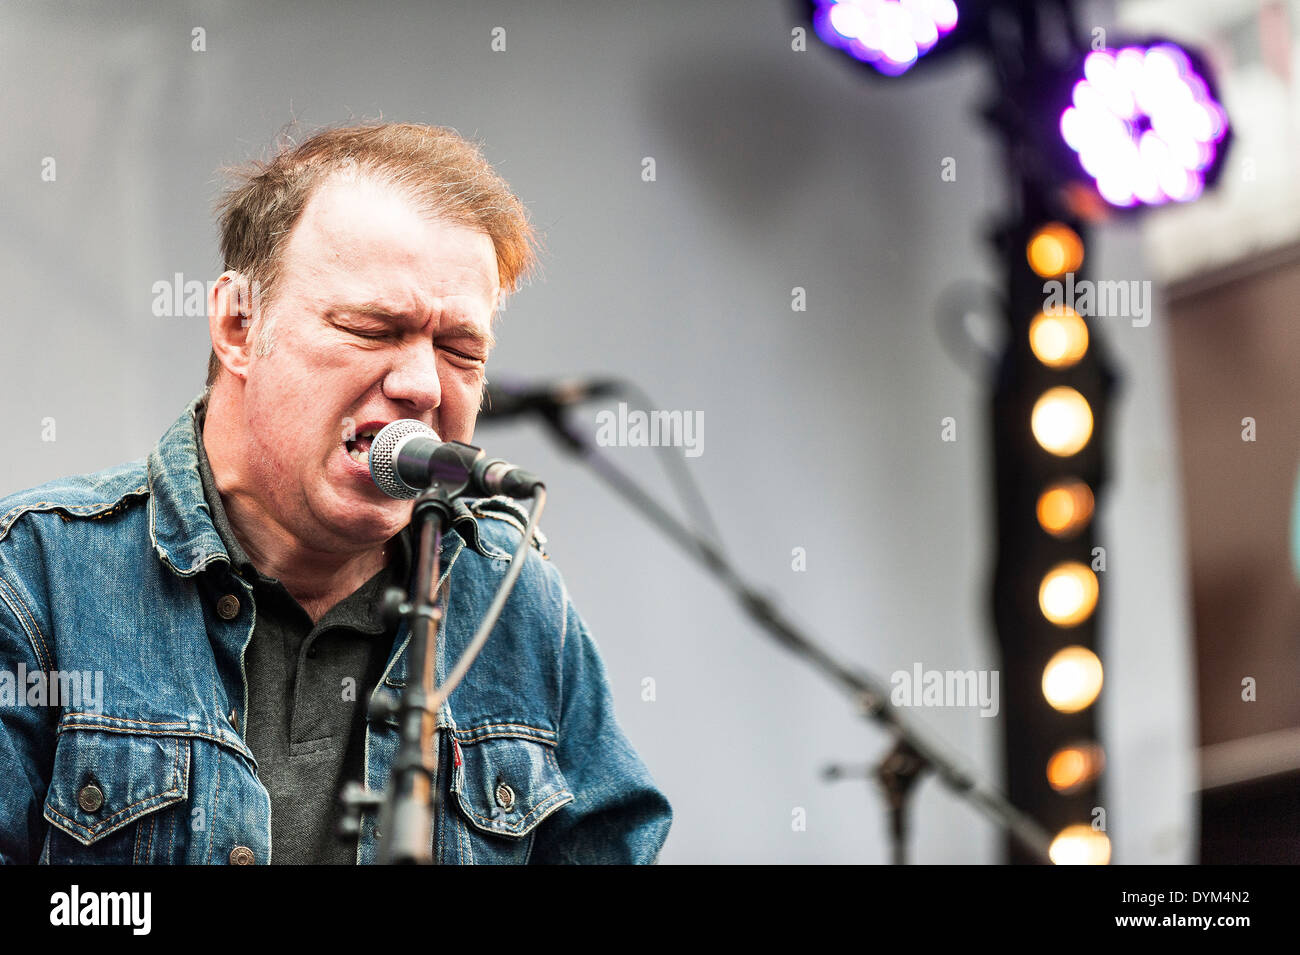 Edwyn Collins performing an acoustic set at the Berwick Street Record Day concert in London. Stock Photo